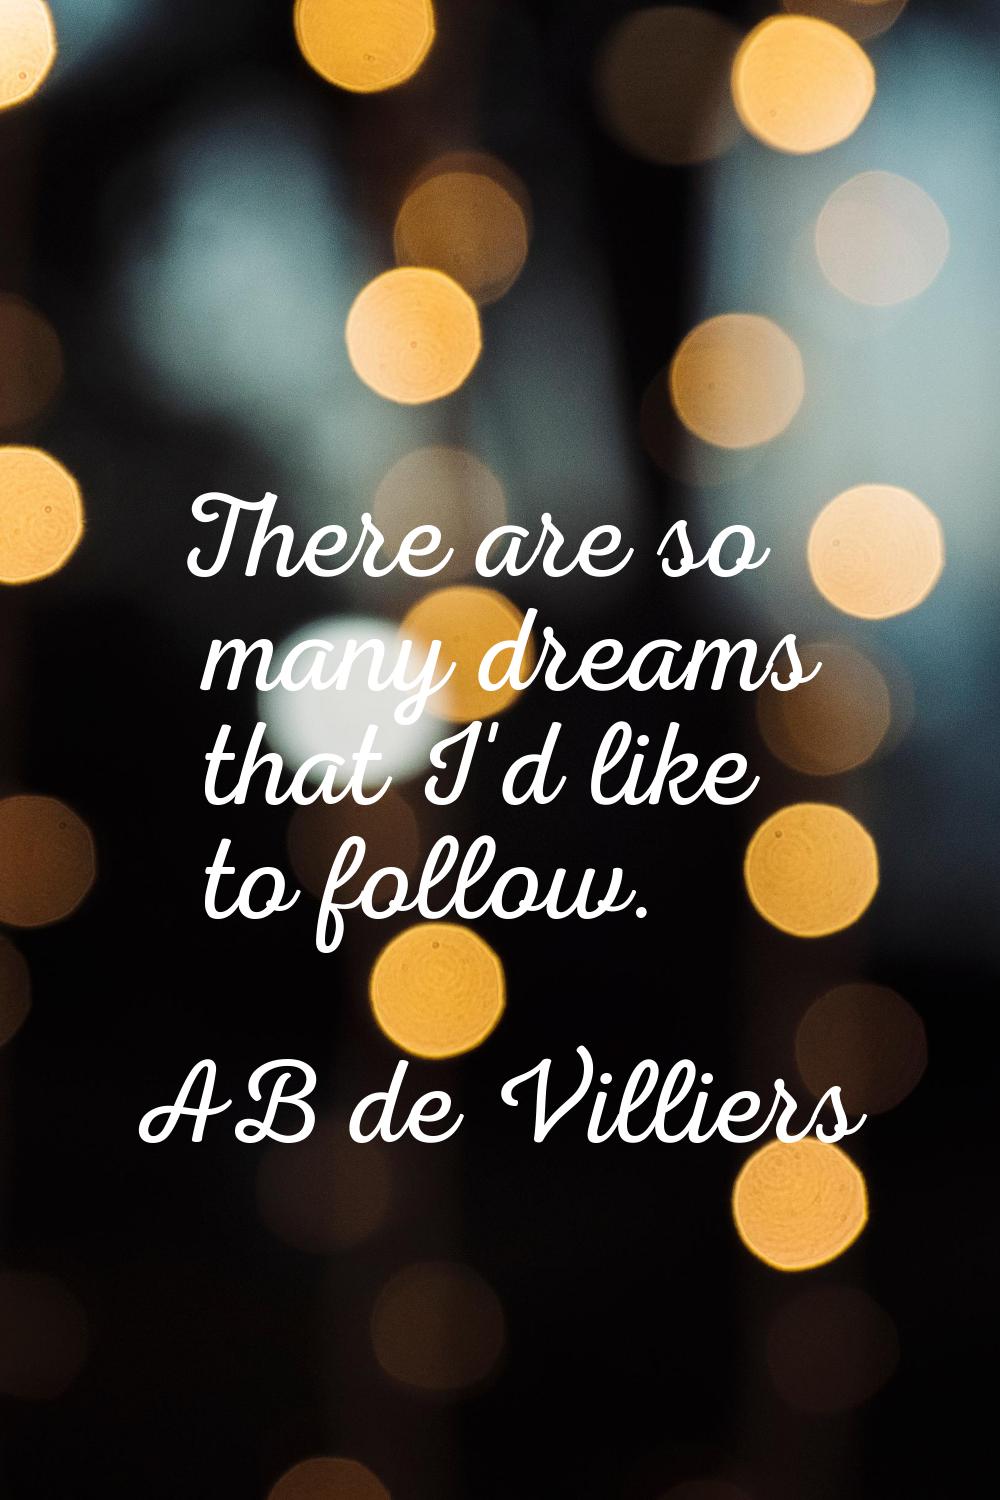 There are so many dreams that I'd like to follow.